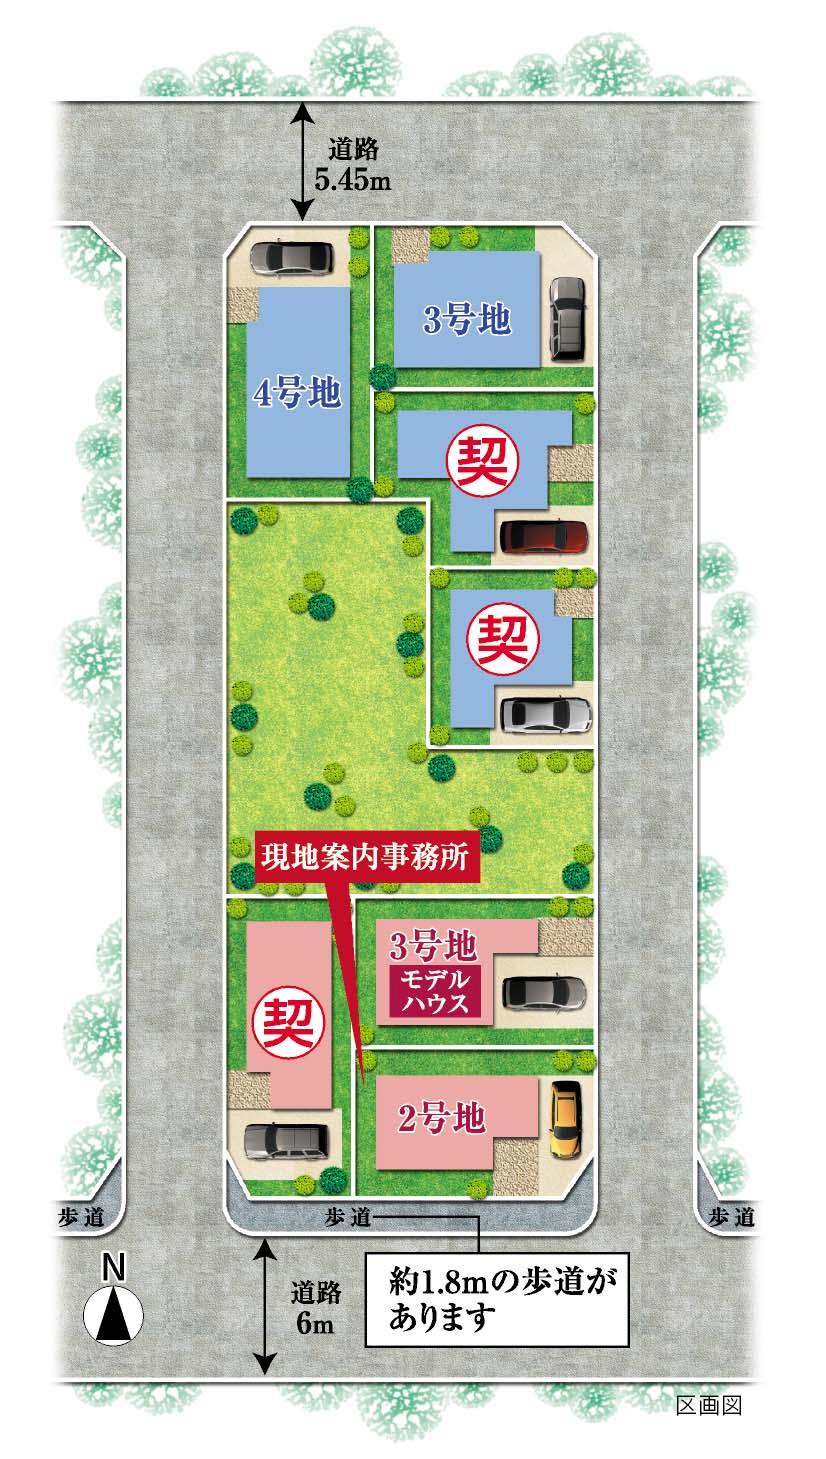 Compartment figure. 27,998,000 yen, 4LDK, Land area 74.06 sq m , Building area 109.46 sq m   [Local sectioning view]